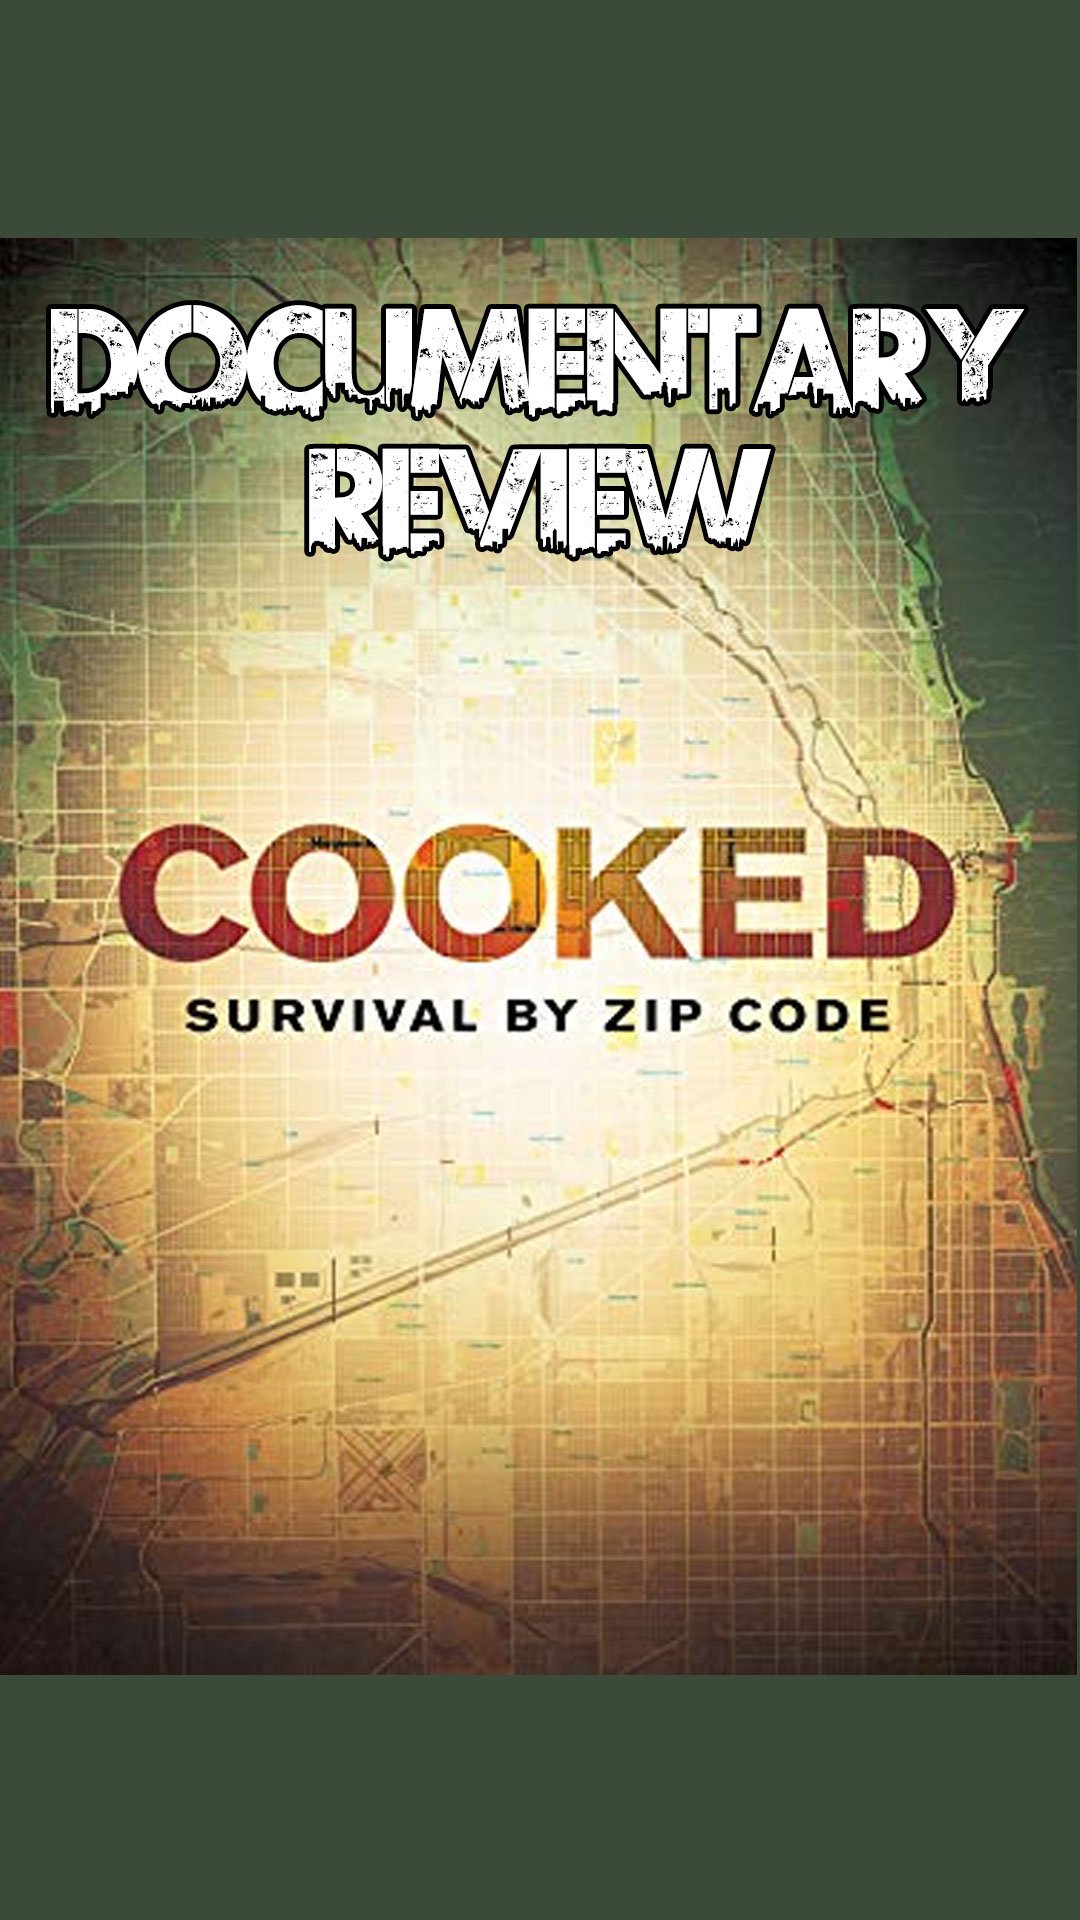 Cooked: Survival by Zip Code Film Review